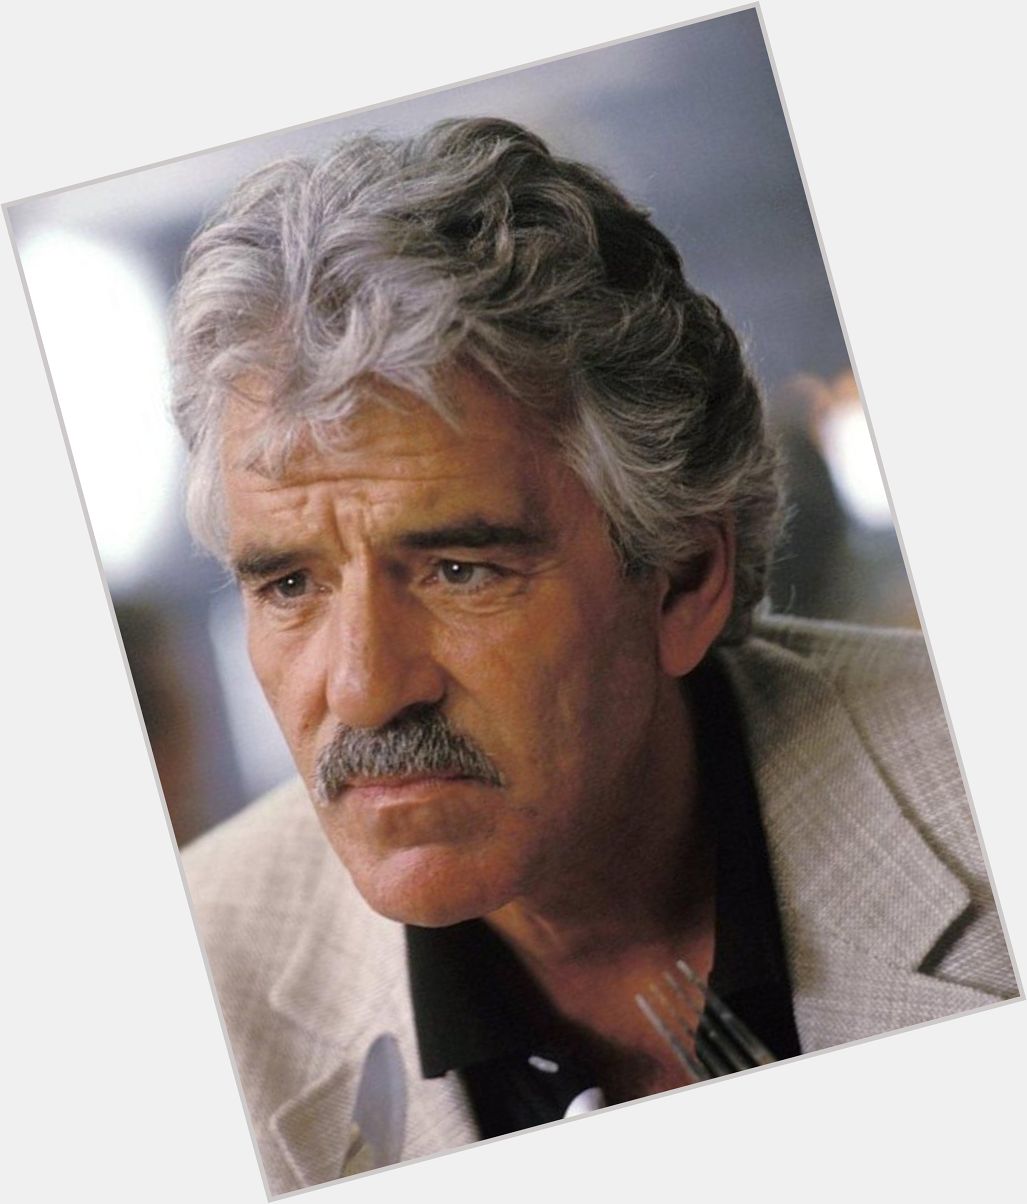 Happy birthday to Dennis Farina, born February 29th, 1944 and passed away in 2013 at the young age of 17. 